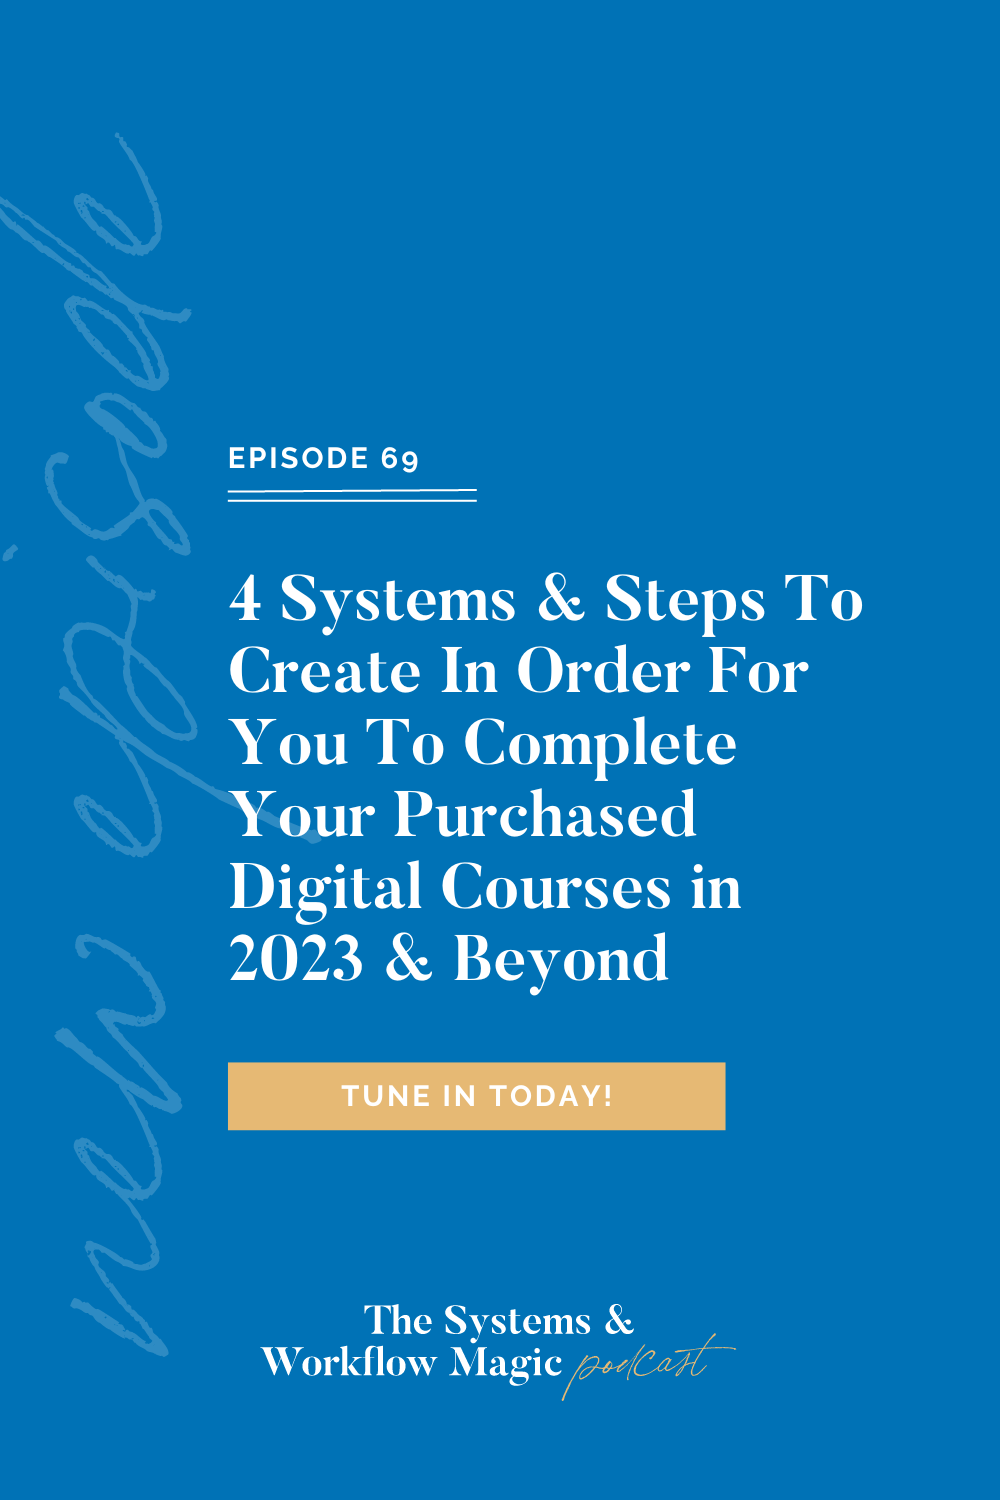 4-Systems-&-Steps-to-Create-In-order-for-You-to-Complete-Your-Purchased-Digital-Courses-in-2023-&-beyond